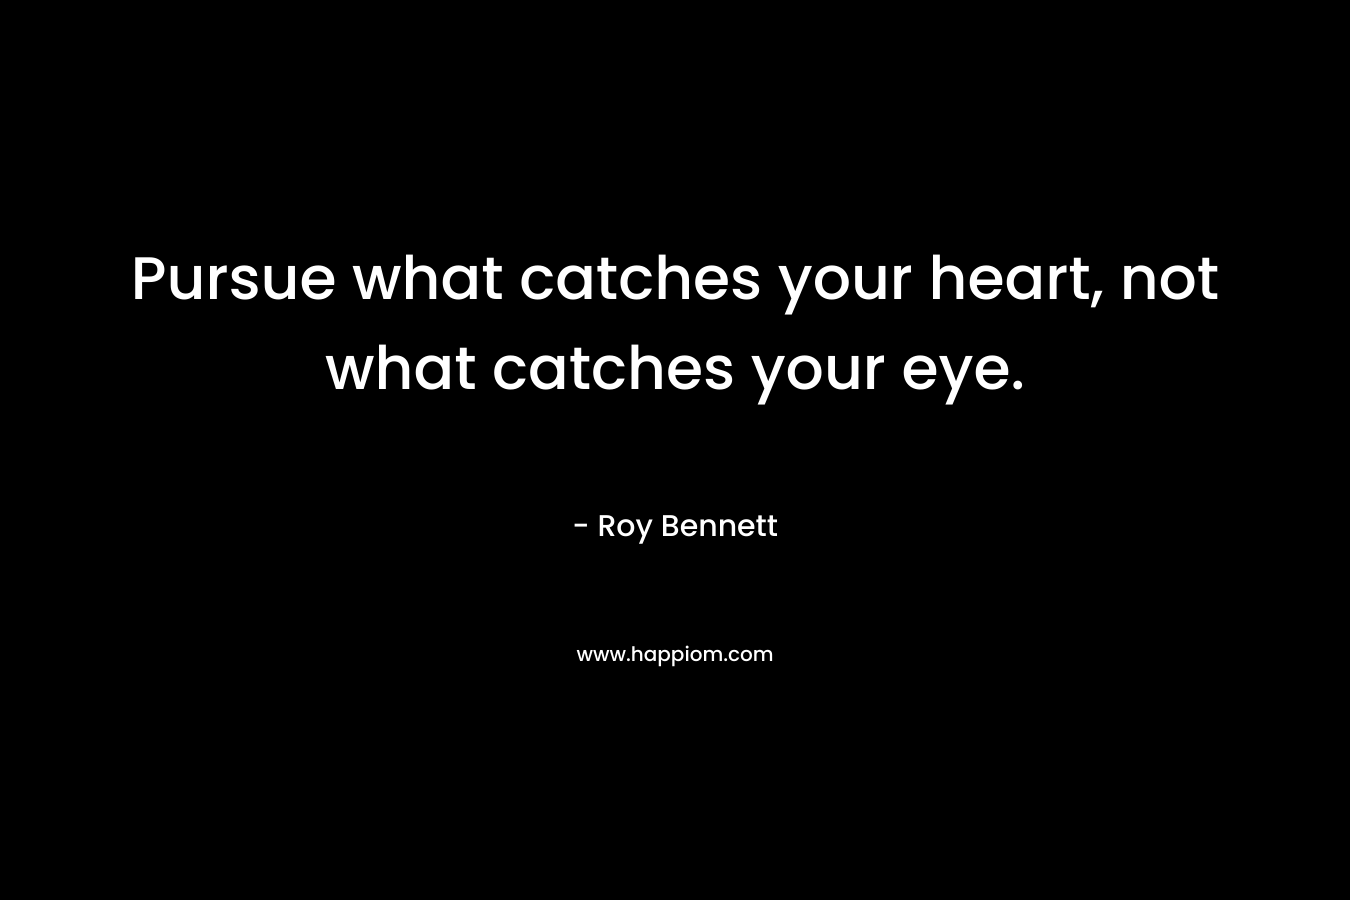 Pursue what catches your heart, not what catches your eye.